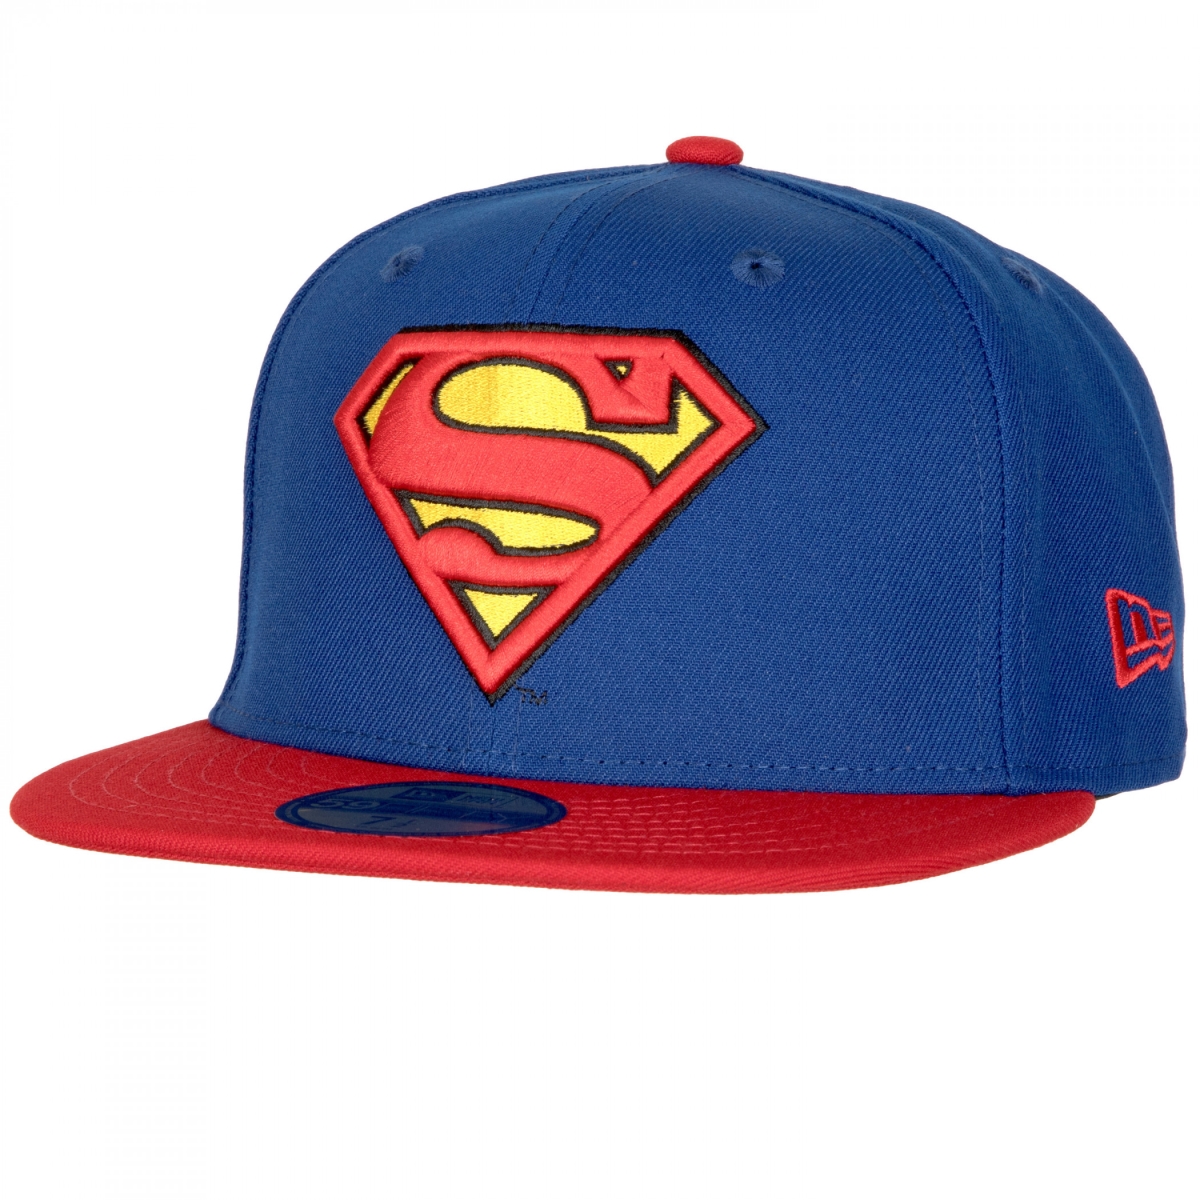 Picture of Superman 854366-73-4fitte Superman Classic Emblem New Era 59Fifty Fitted Hat - 7.75 Fitted